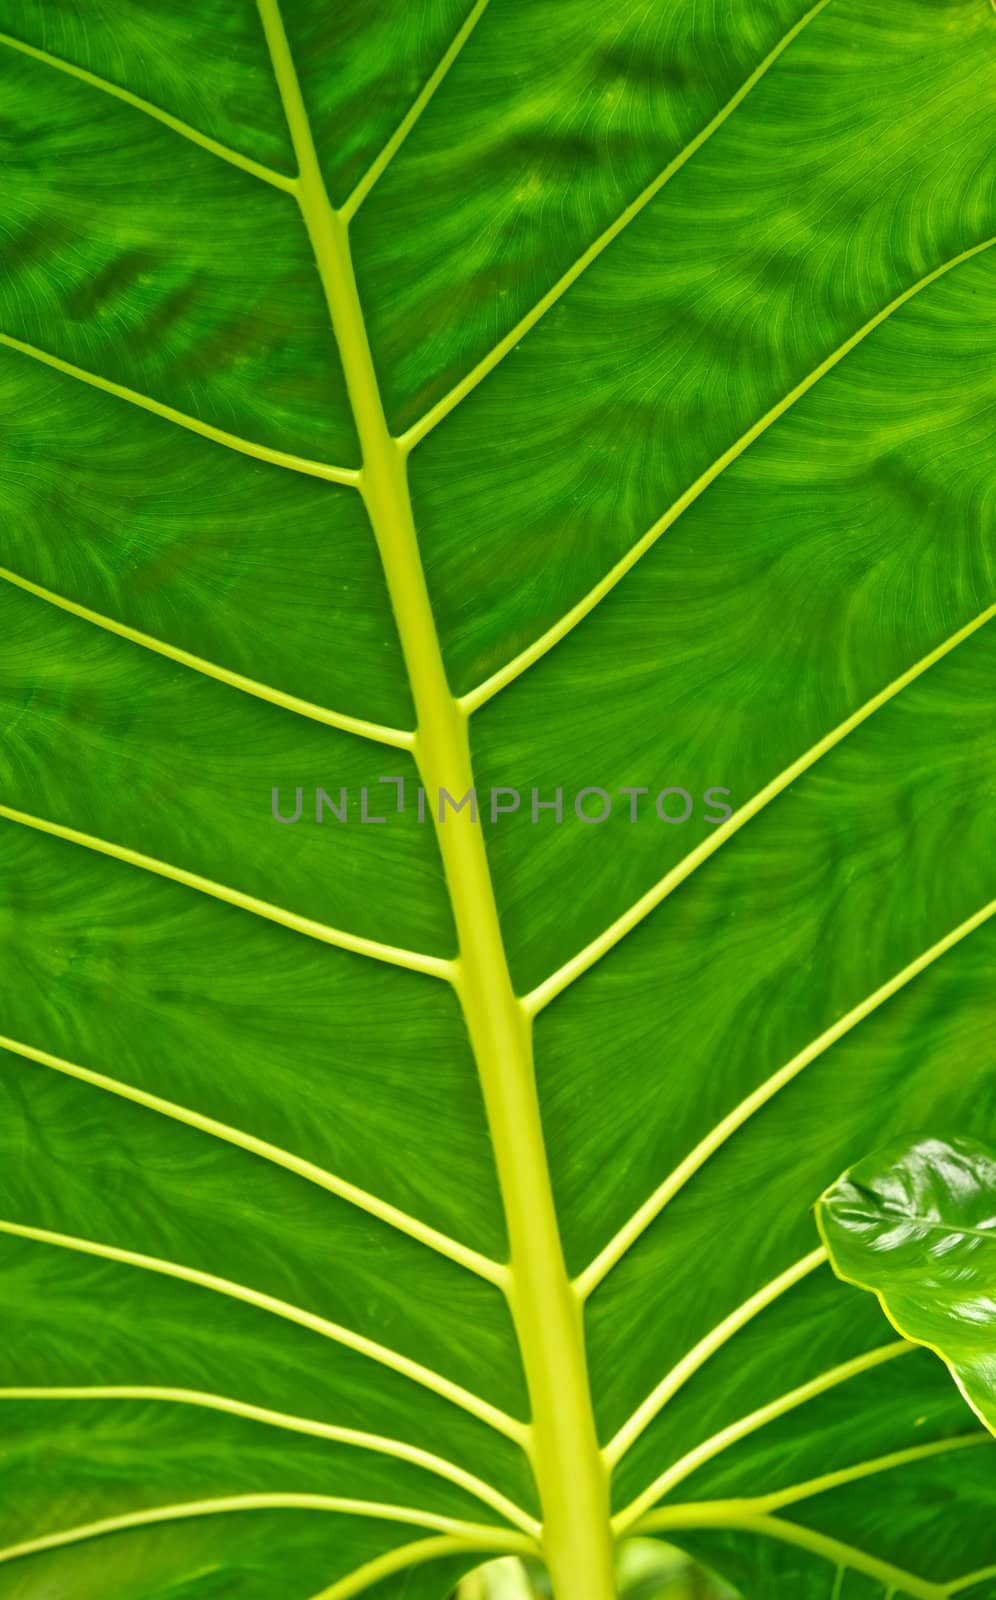 Giant green leaf with yellow branches and veins.